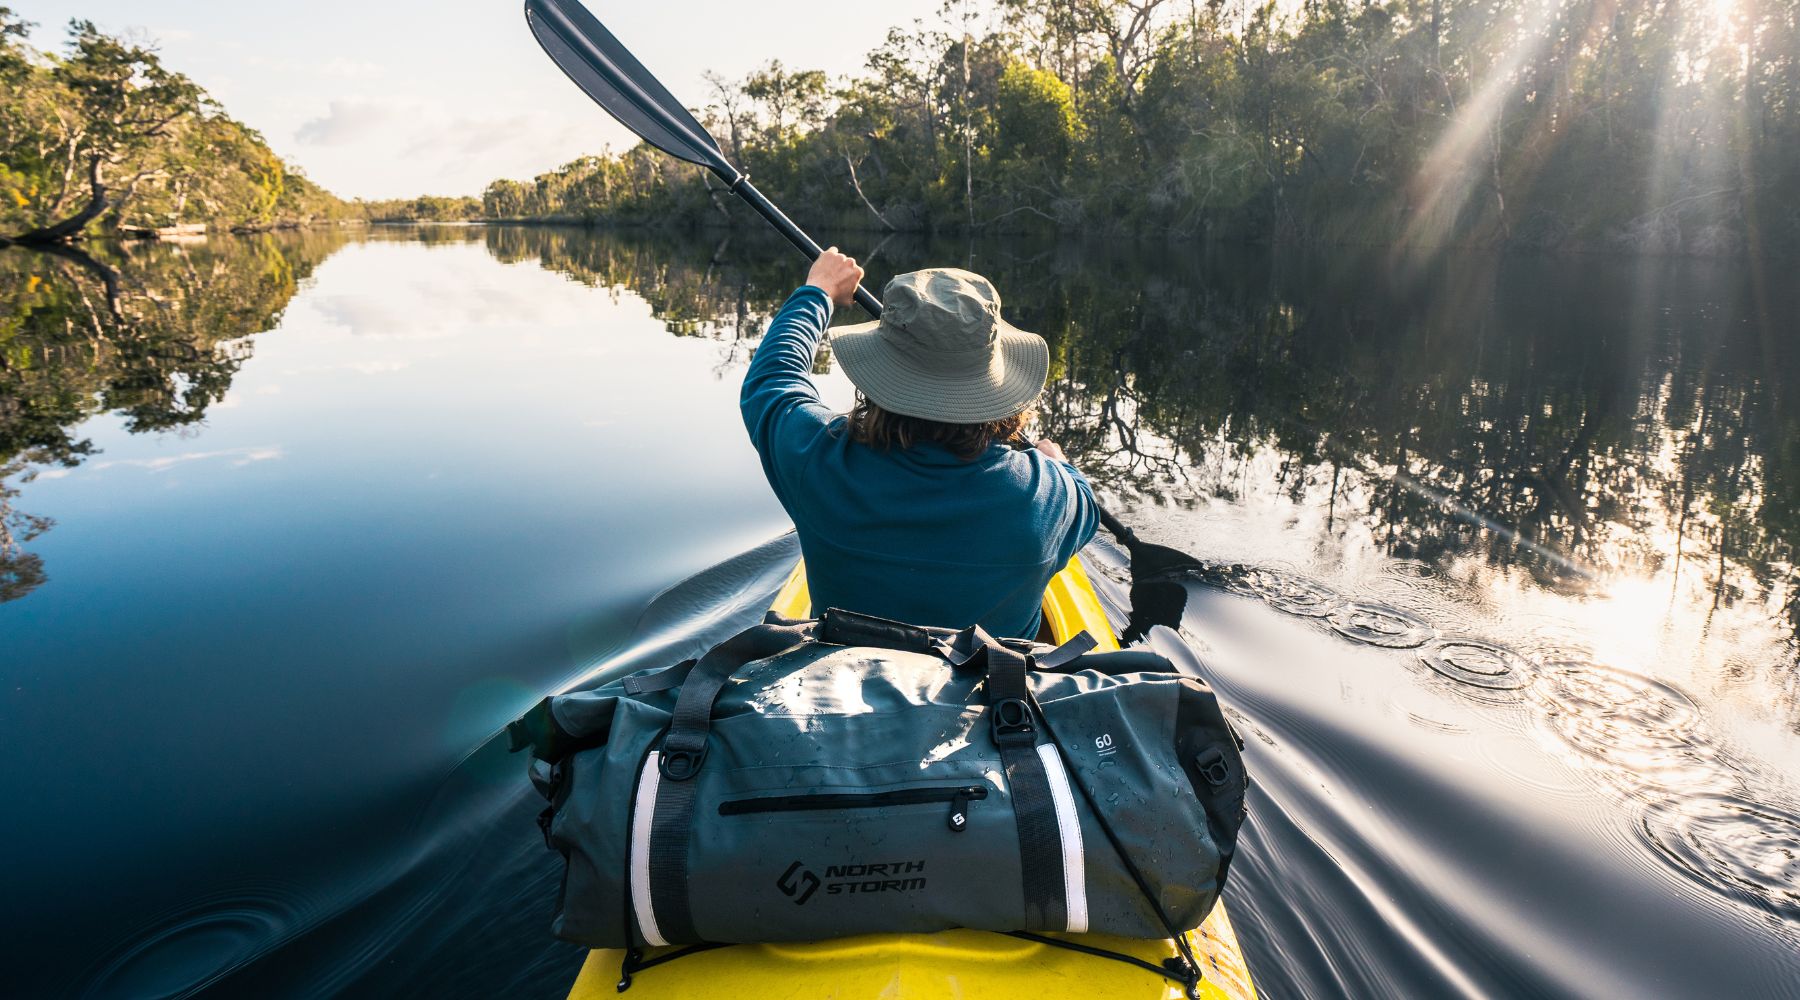 Man_paddling_a_kayak_on_the_river with his 60L Waterproof North Storm duffel bag on the back.